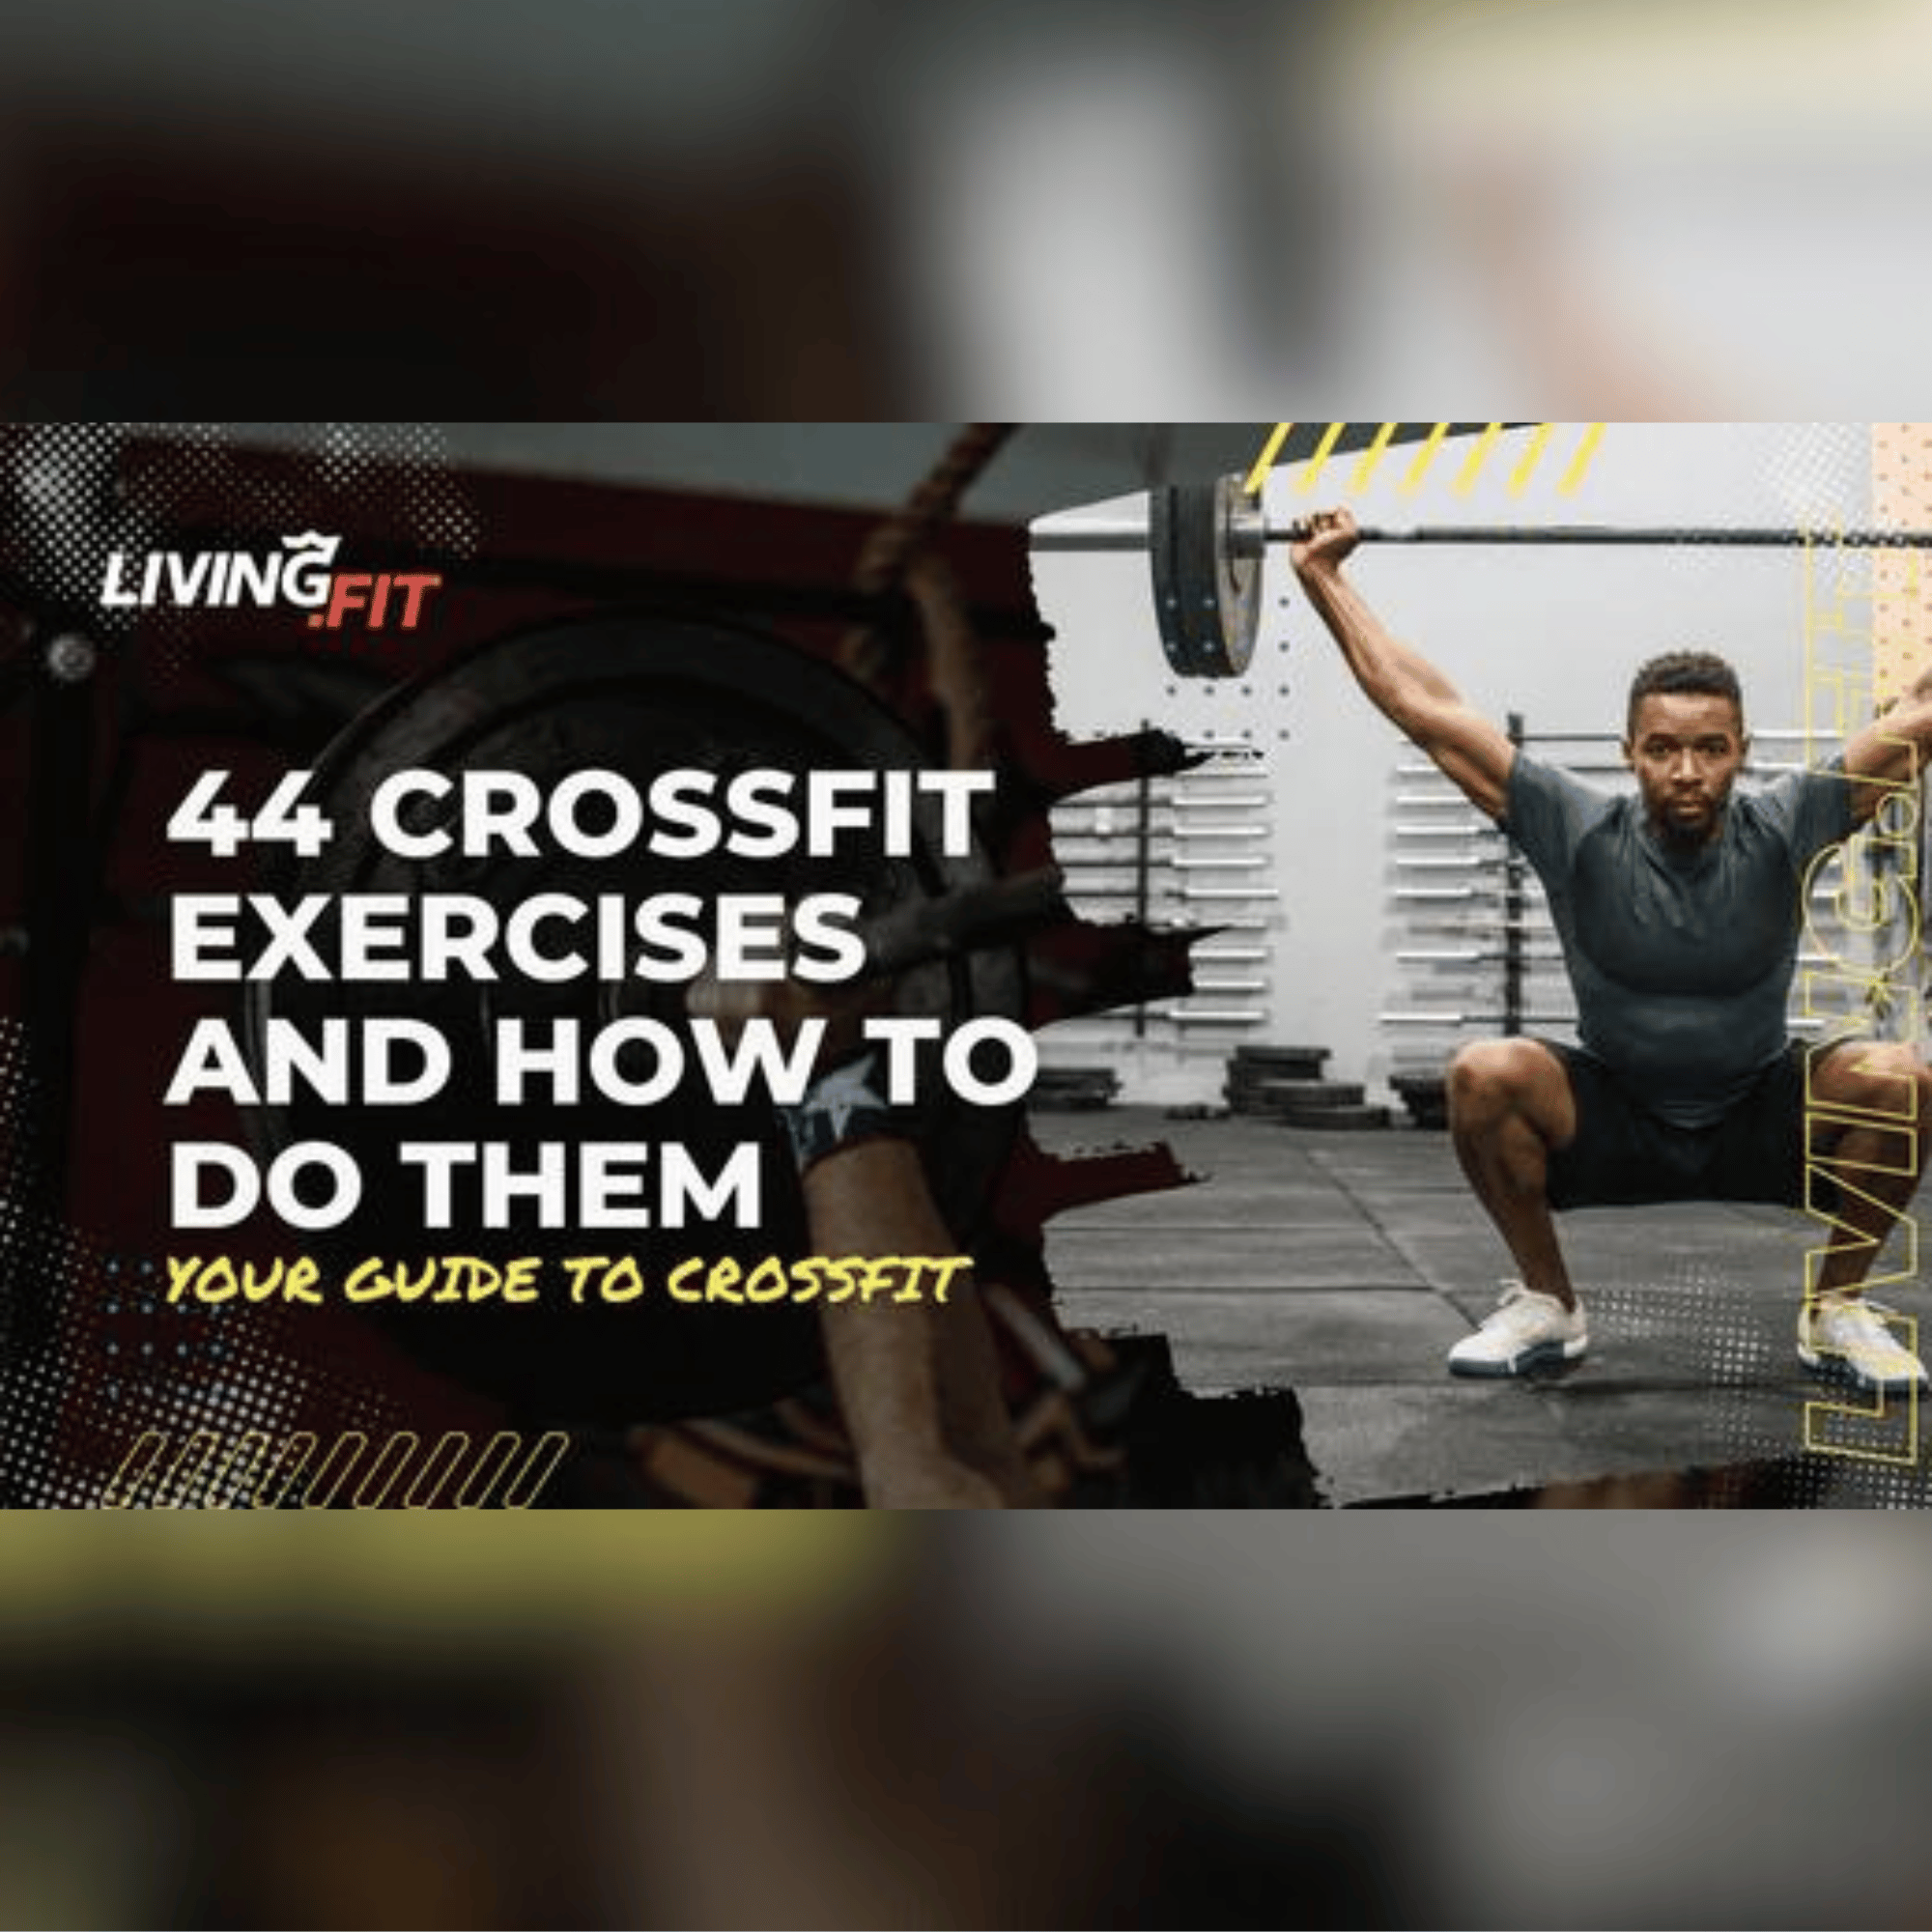 Fitness Fashion for the Indian Gym Enthusiast: Embracing Muscle Torque